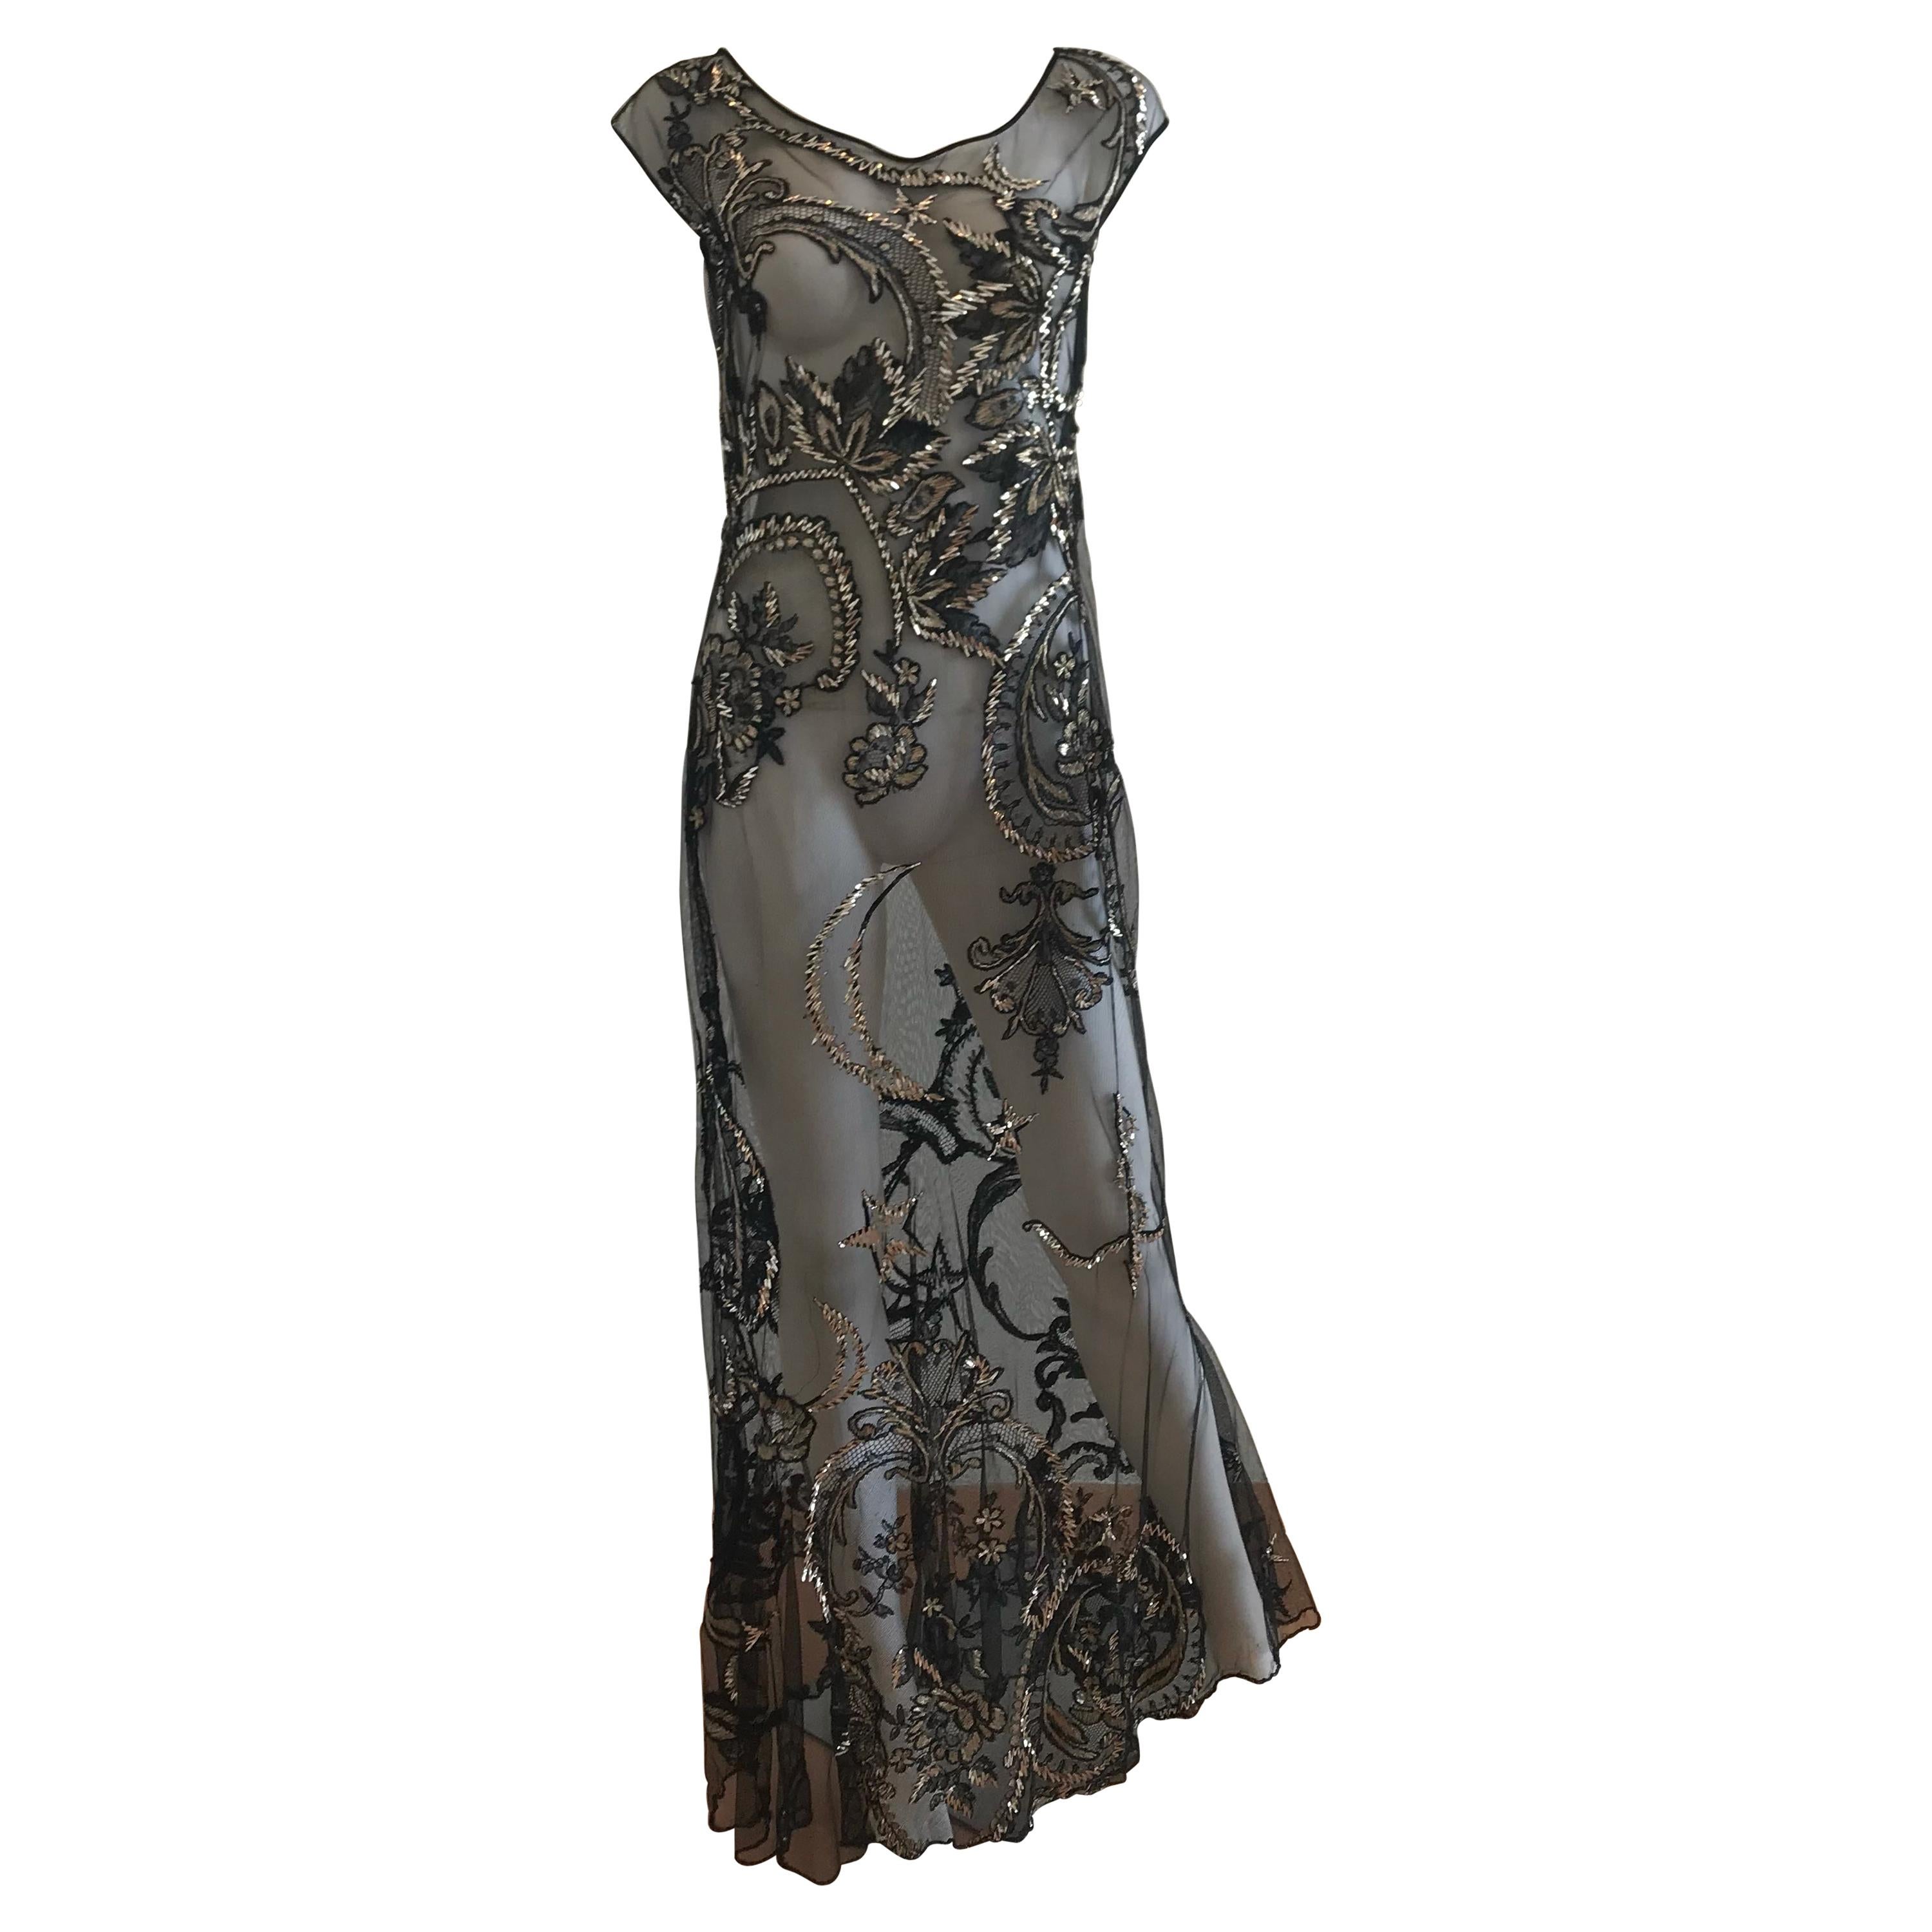 FW 1998 Gianfranco Ferre Metallic Embroidered Tulle Evening Gown For Sale 9